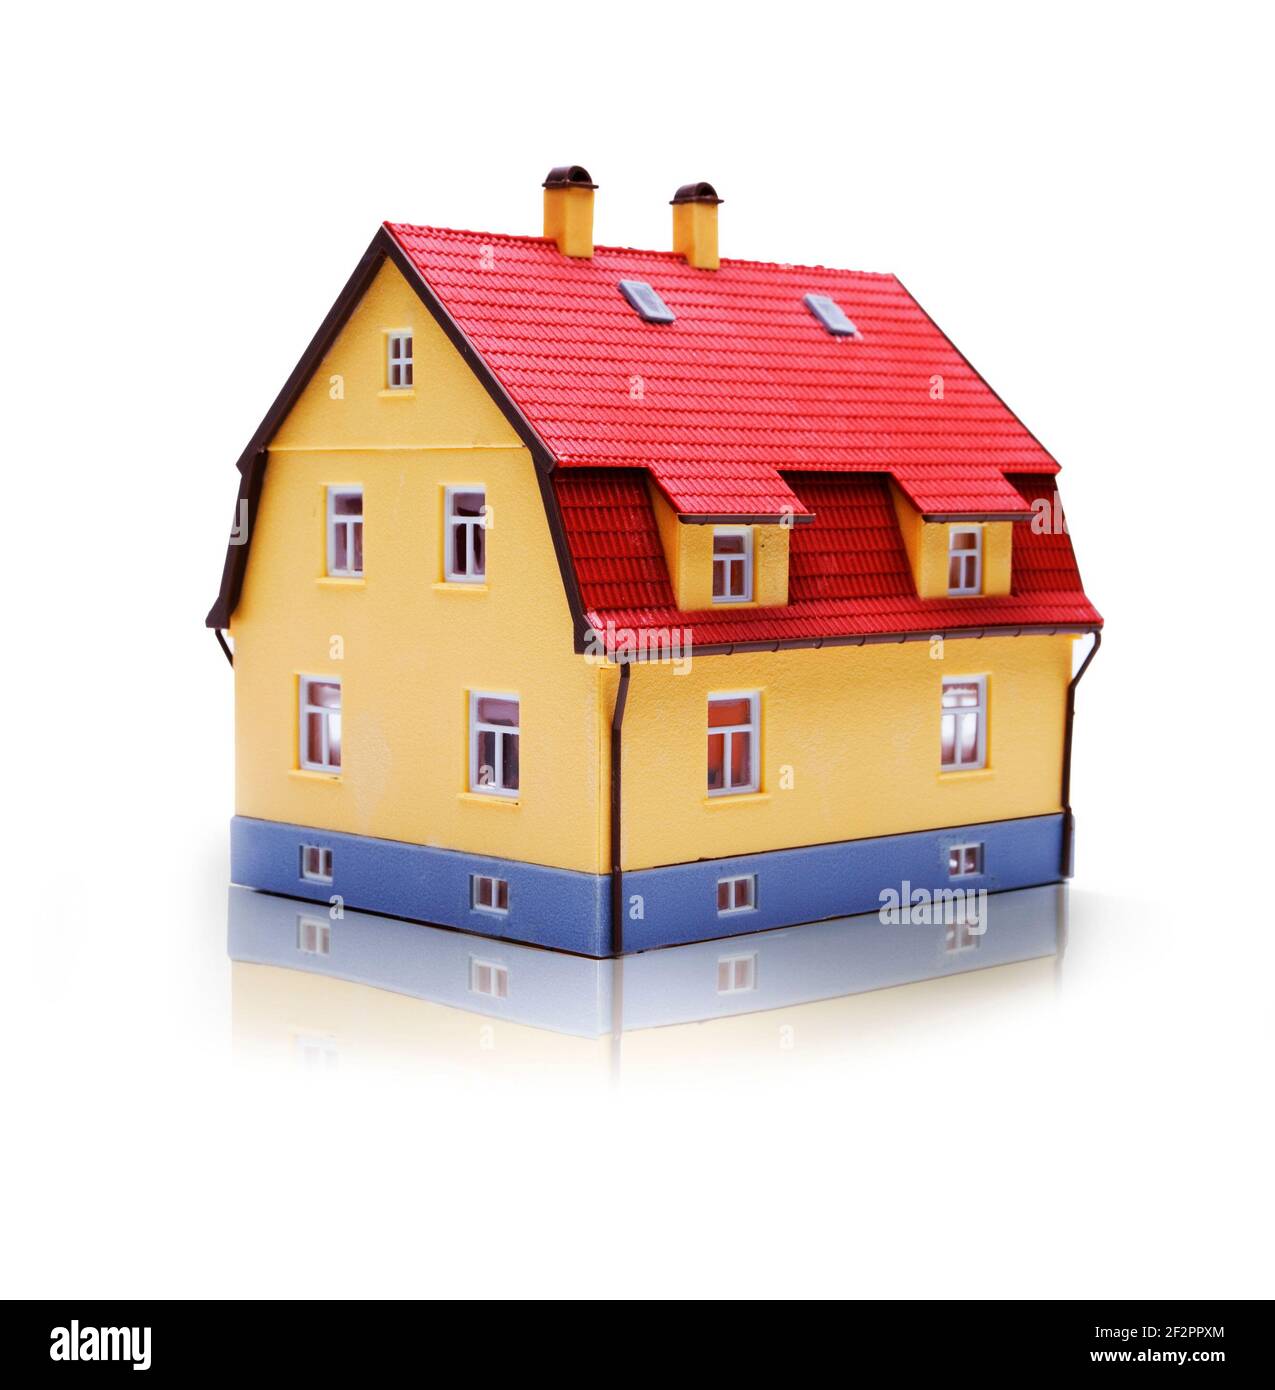 Residential house as a model on a white background Stock Photo